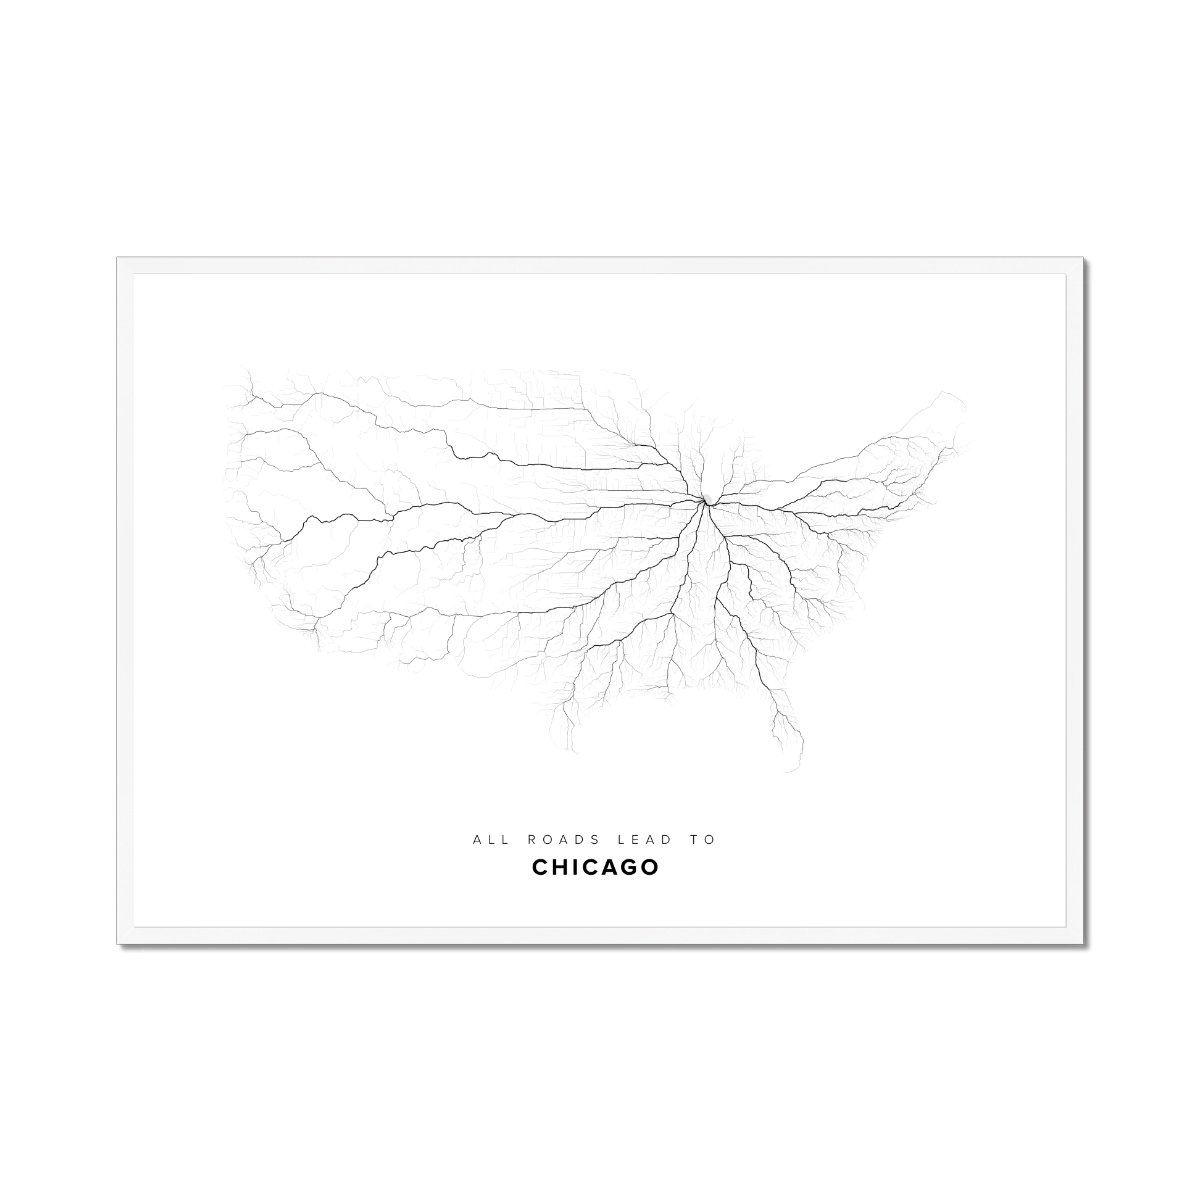 All roads lead to Chicago (United States of America) Fine Art Map Print